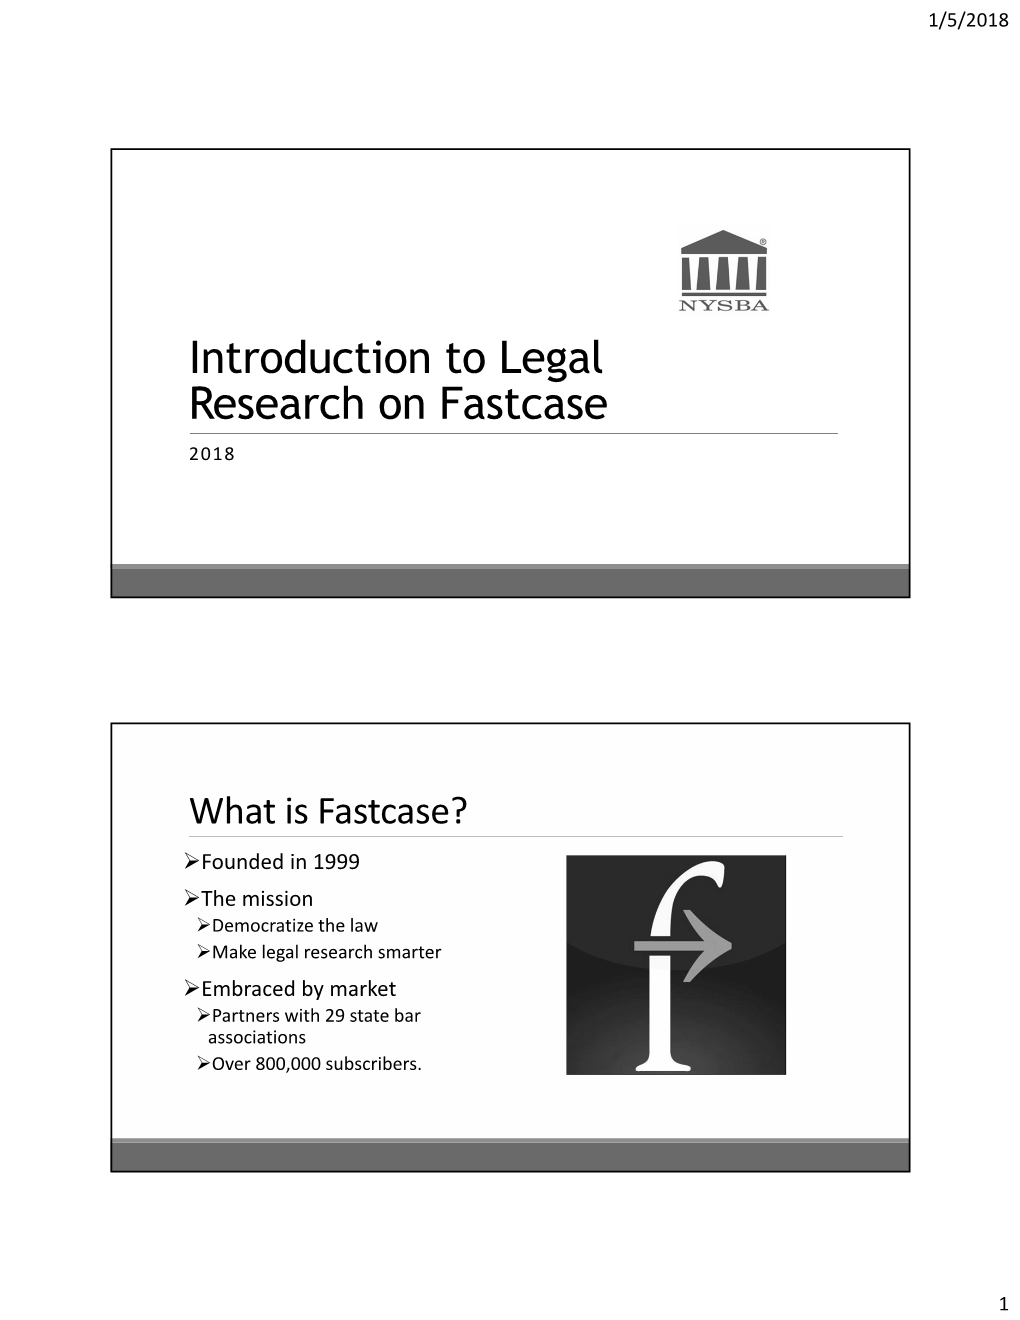 Introduction to Legal Research on Fastcase 2018